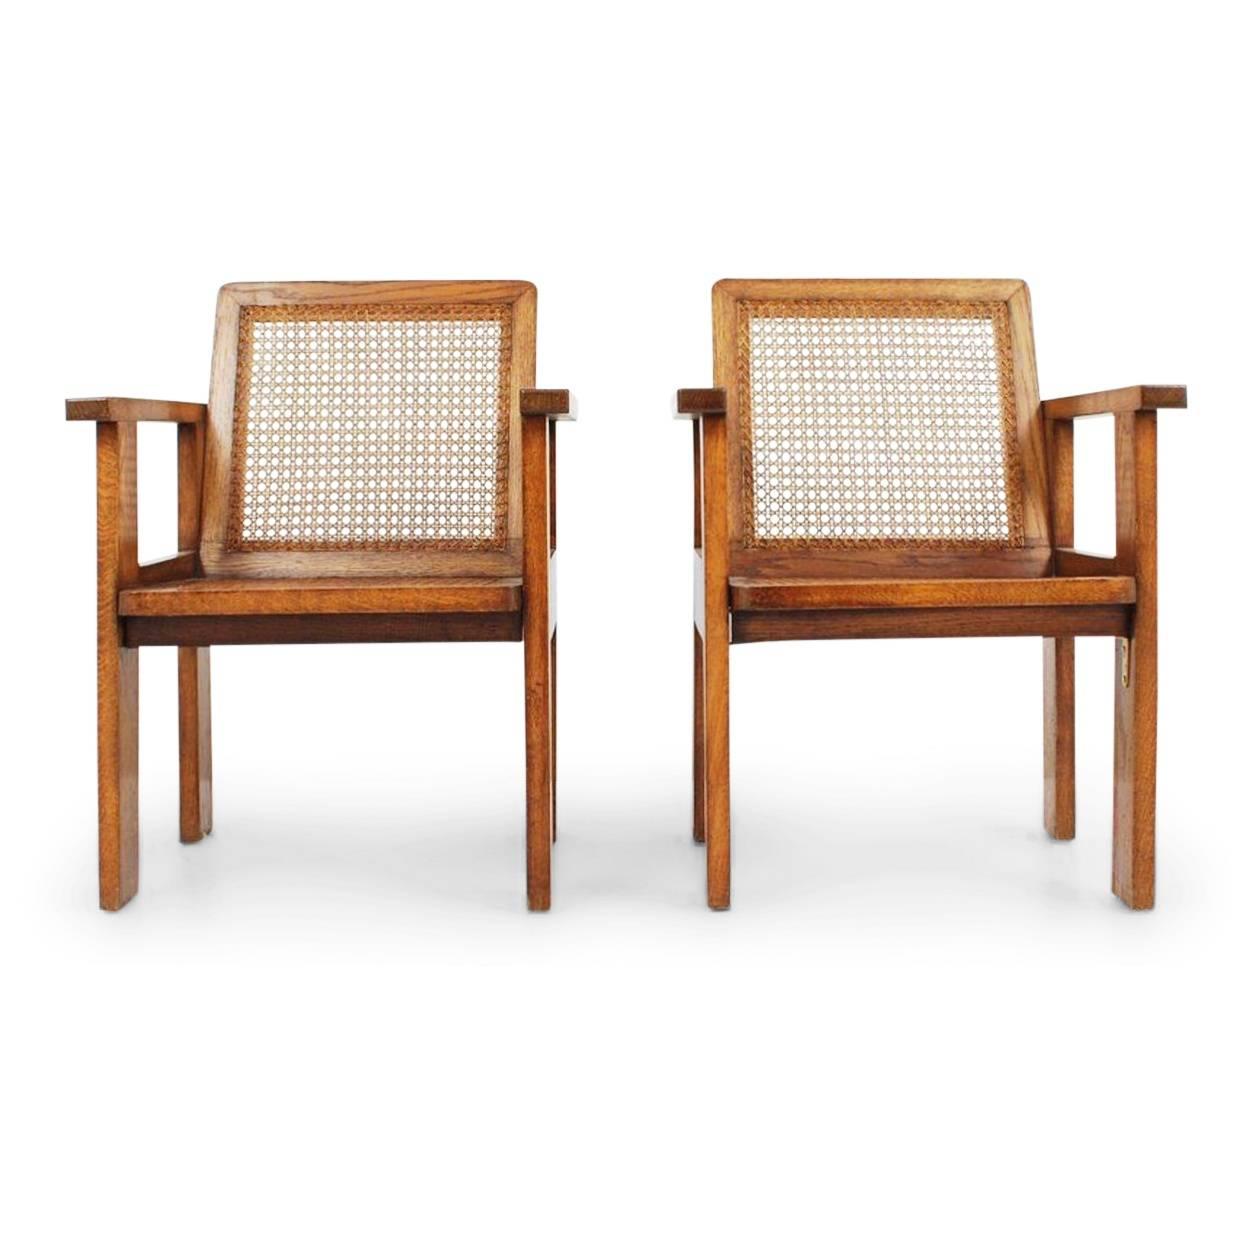 Pair of quarter sawn oak Art Deco armchairs with caned backs and seats, circa 1930. These sculptural club chairs feature the use of clean lines and minimal design making these handsome armchairs suitable for any space. 

The style of these chairs